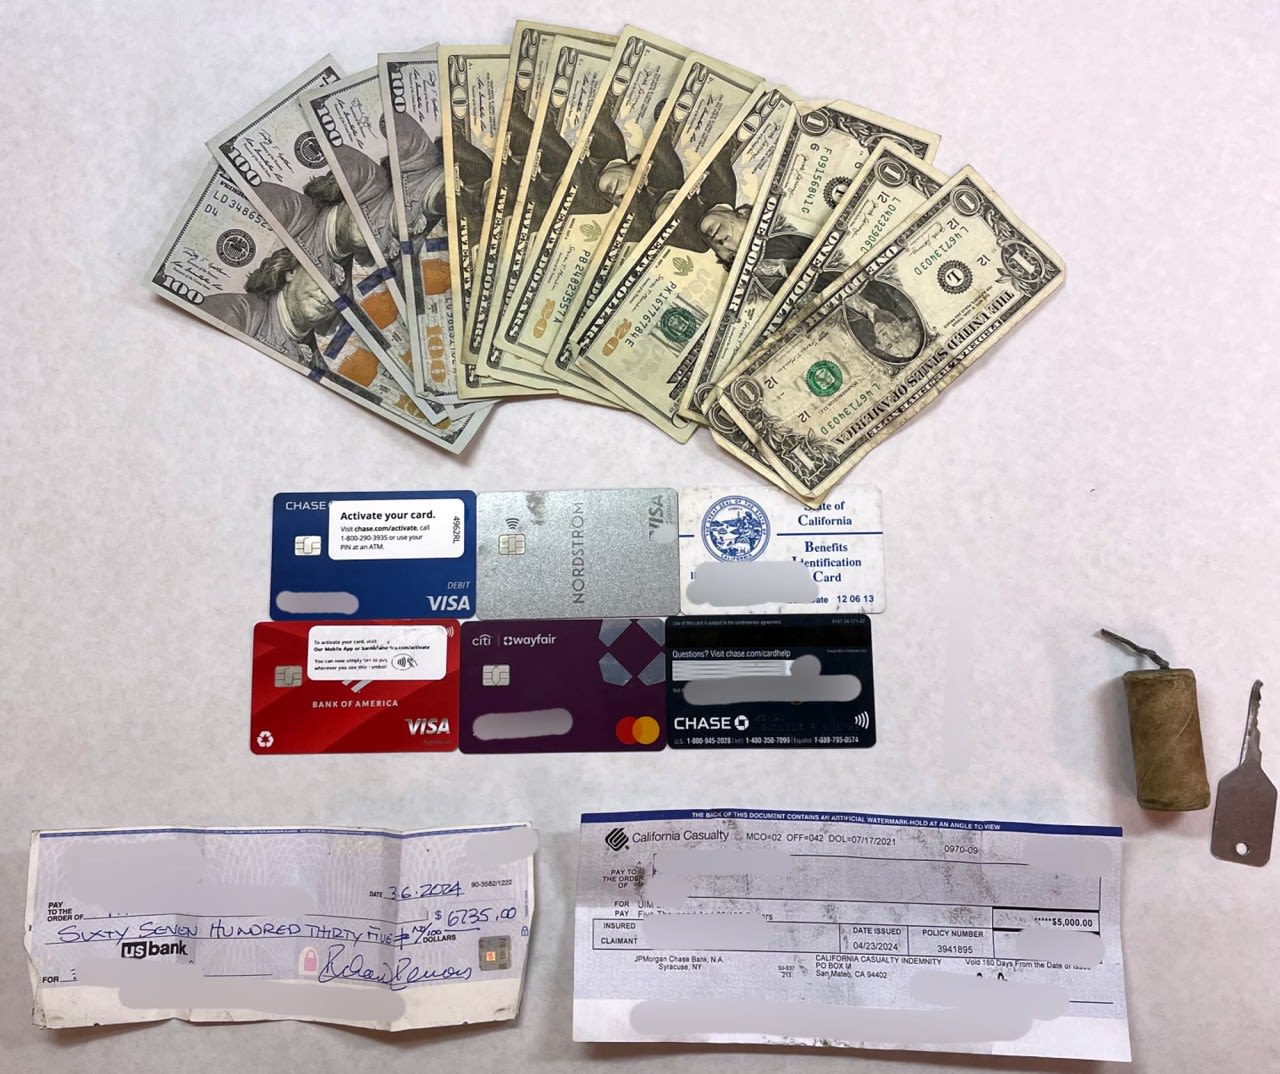 Walnut Creek man arrested for alleged bad check and credit card theft